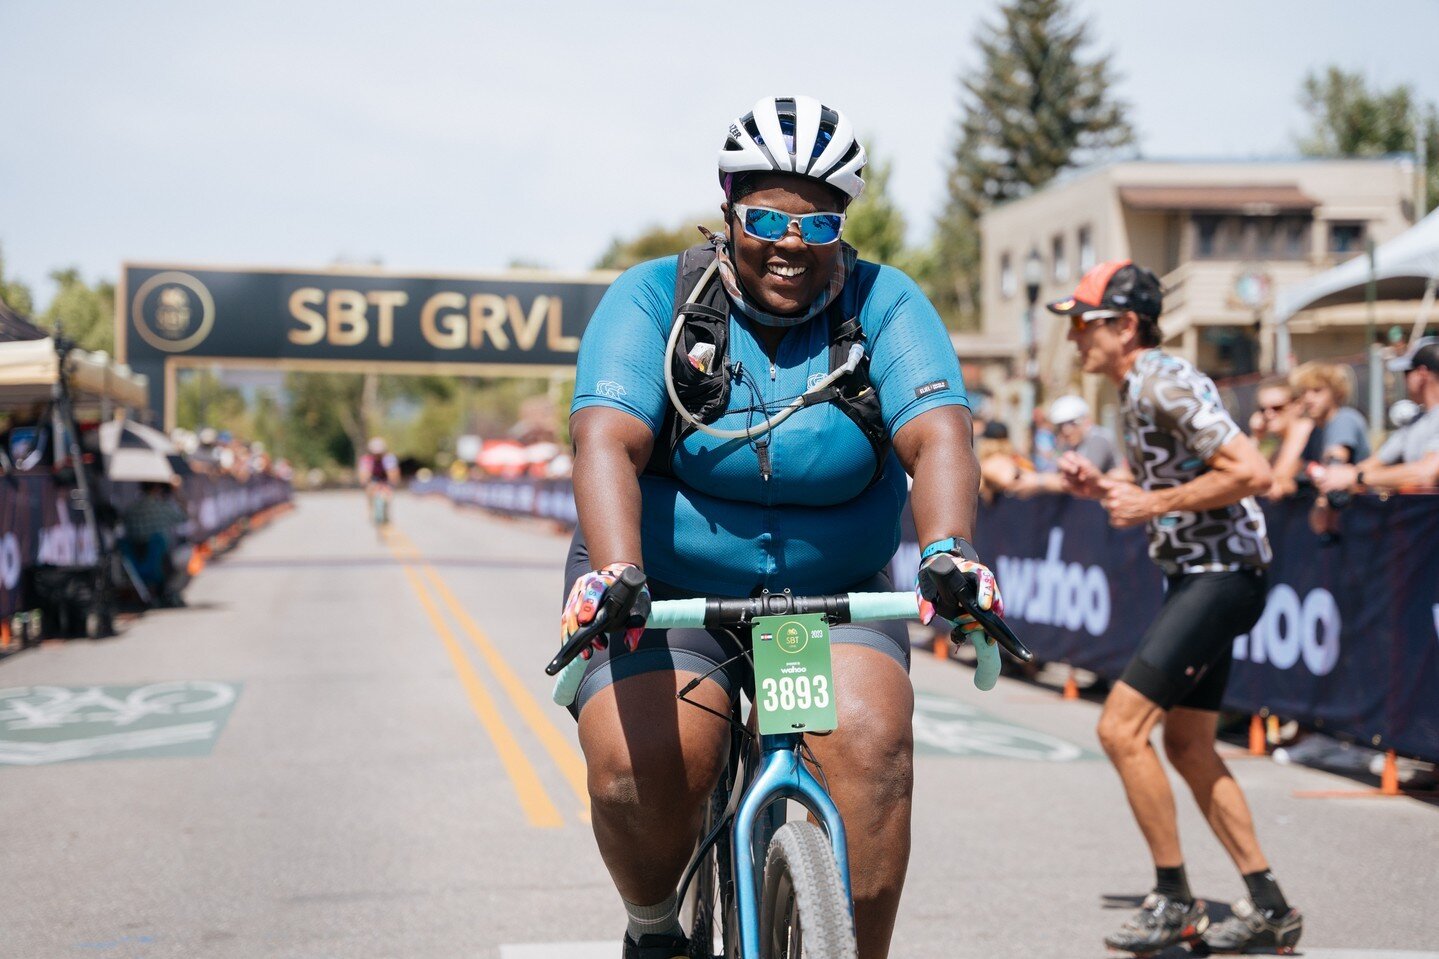 Want to start your week with a healthy dose of #mondaymotivation? @themirnavator has plenty to share.  Whether it's adventures on 2 wheels or 2 feet, we were grateful to have Mirna in Steamboat for her 2nd year.

#sbtgrvl